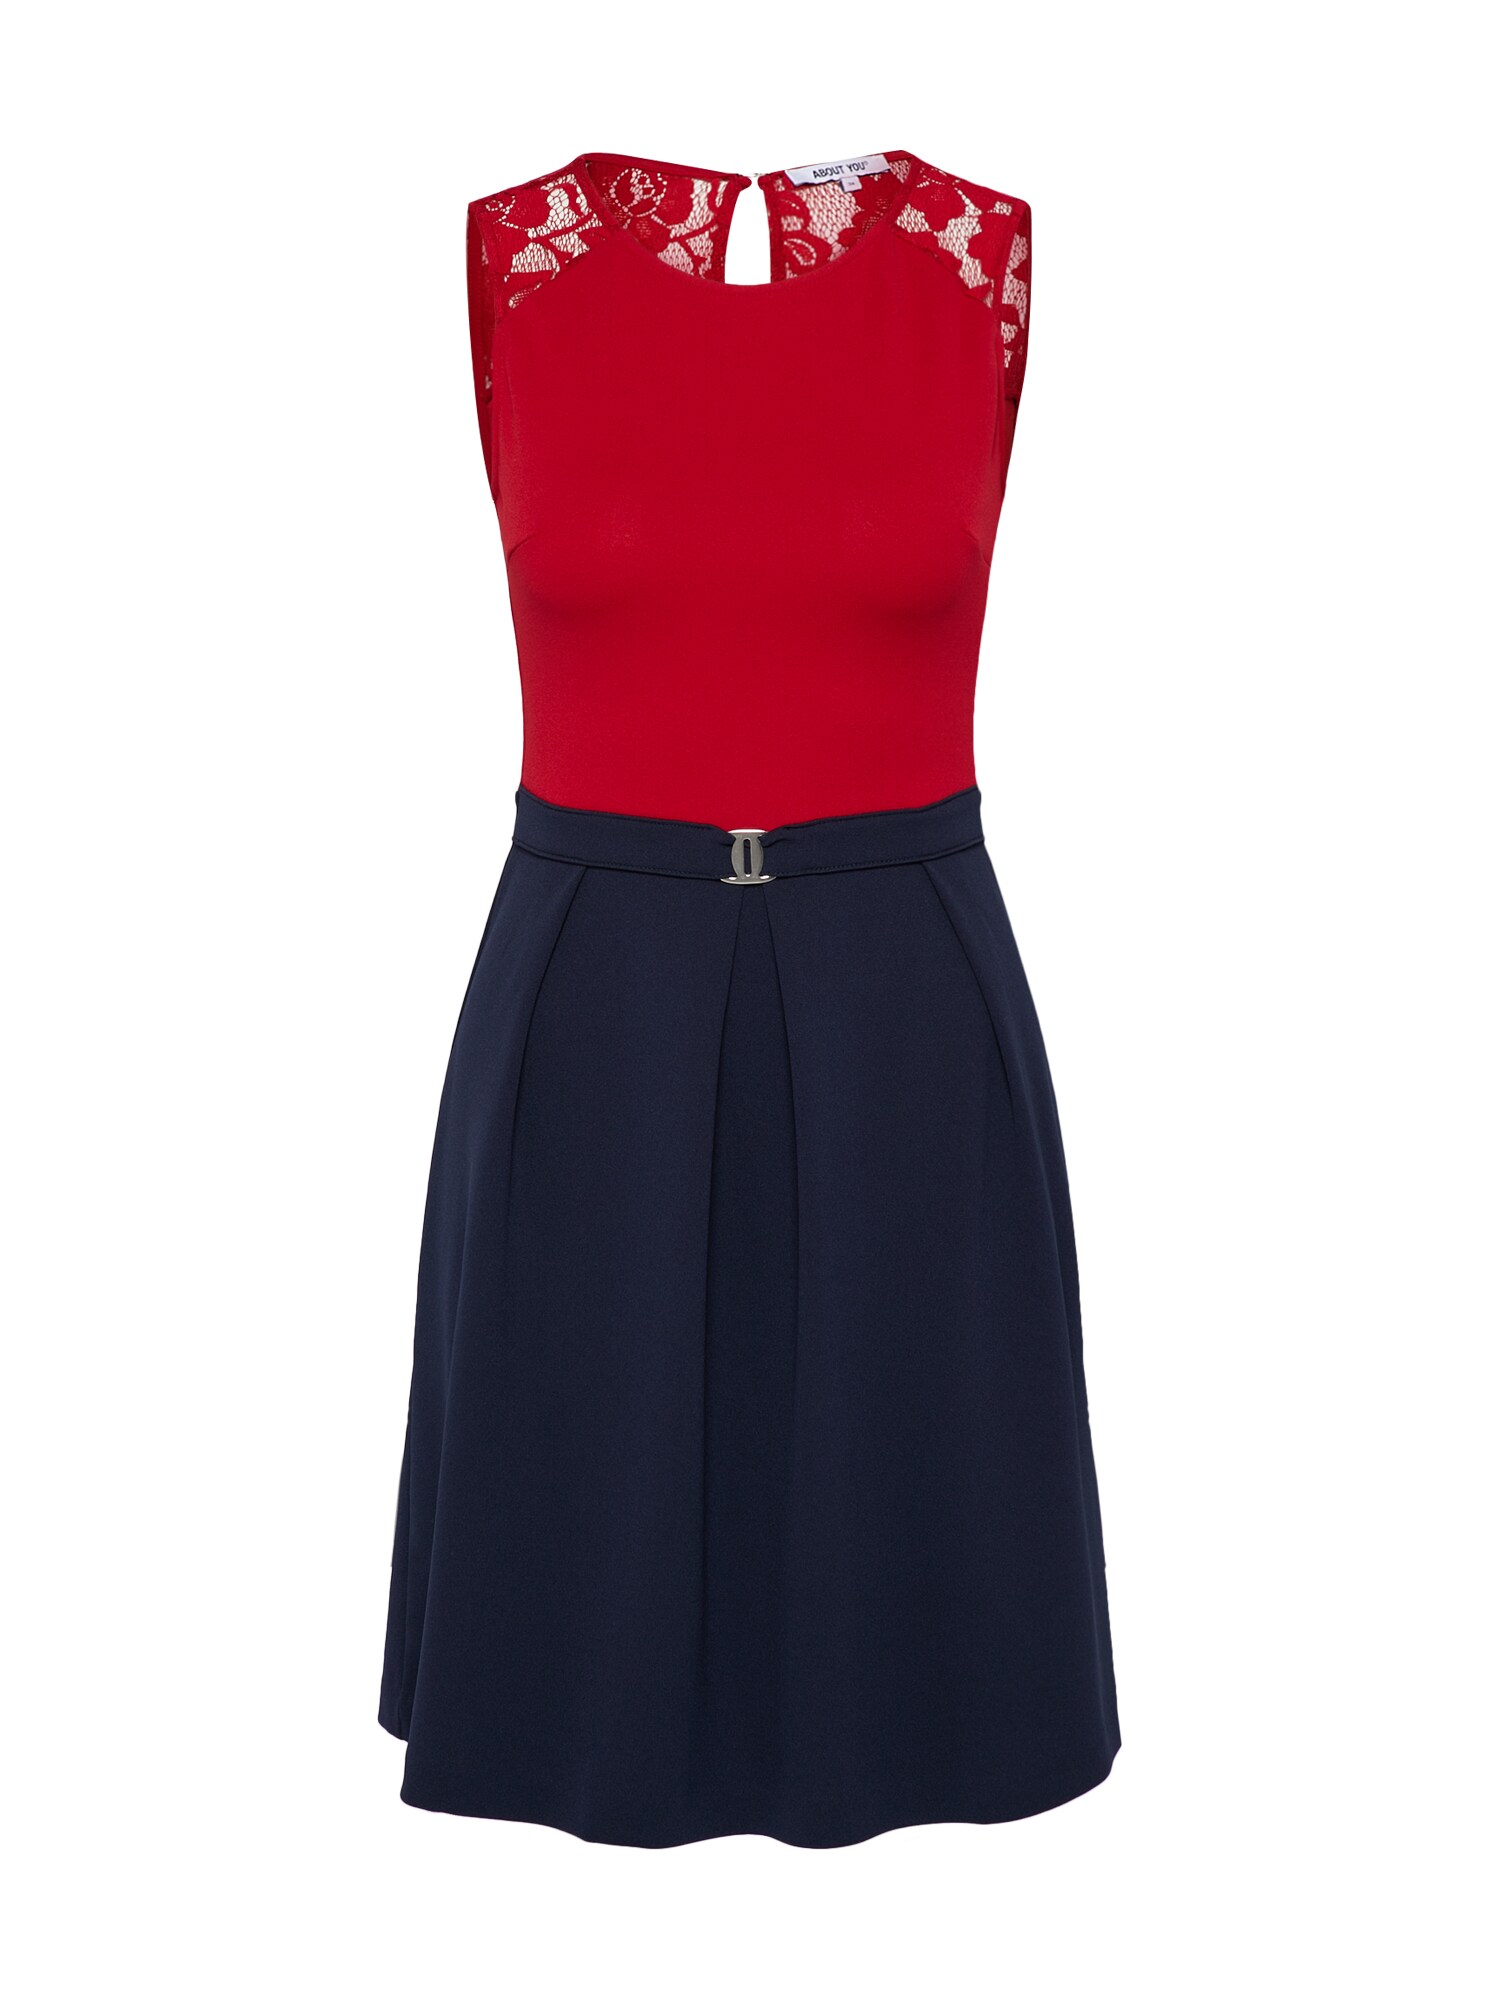 ABOUT YOU Jurk 'Lucille' blauw / rood